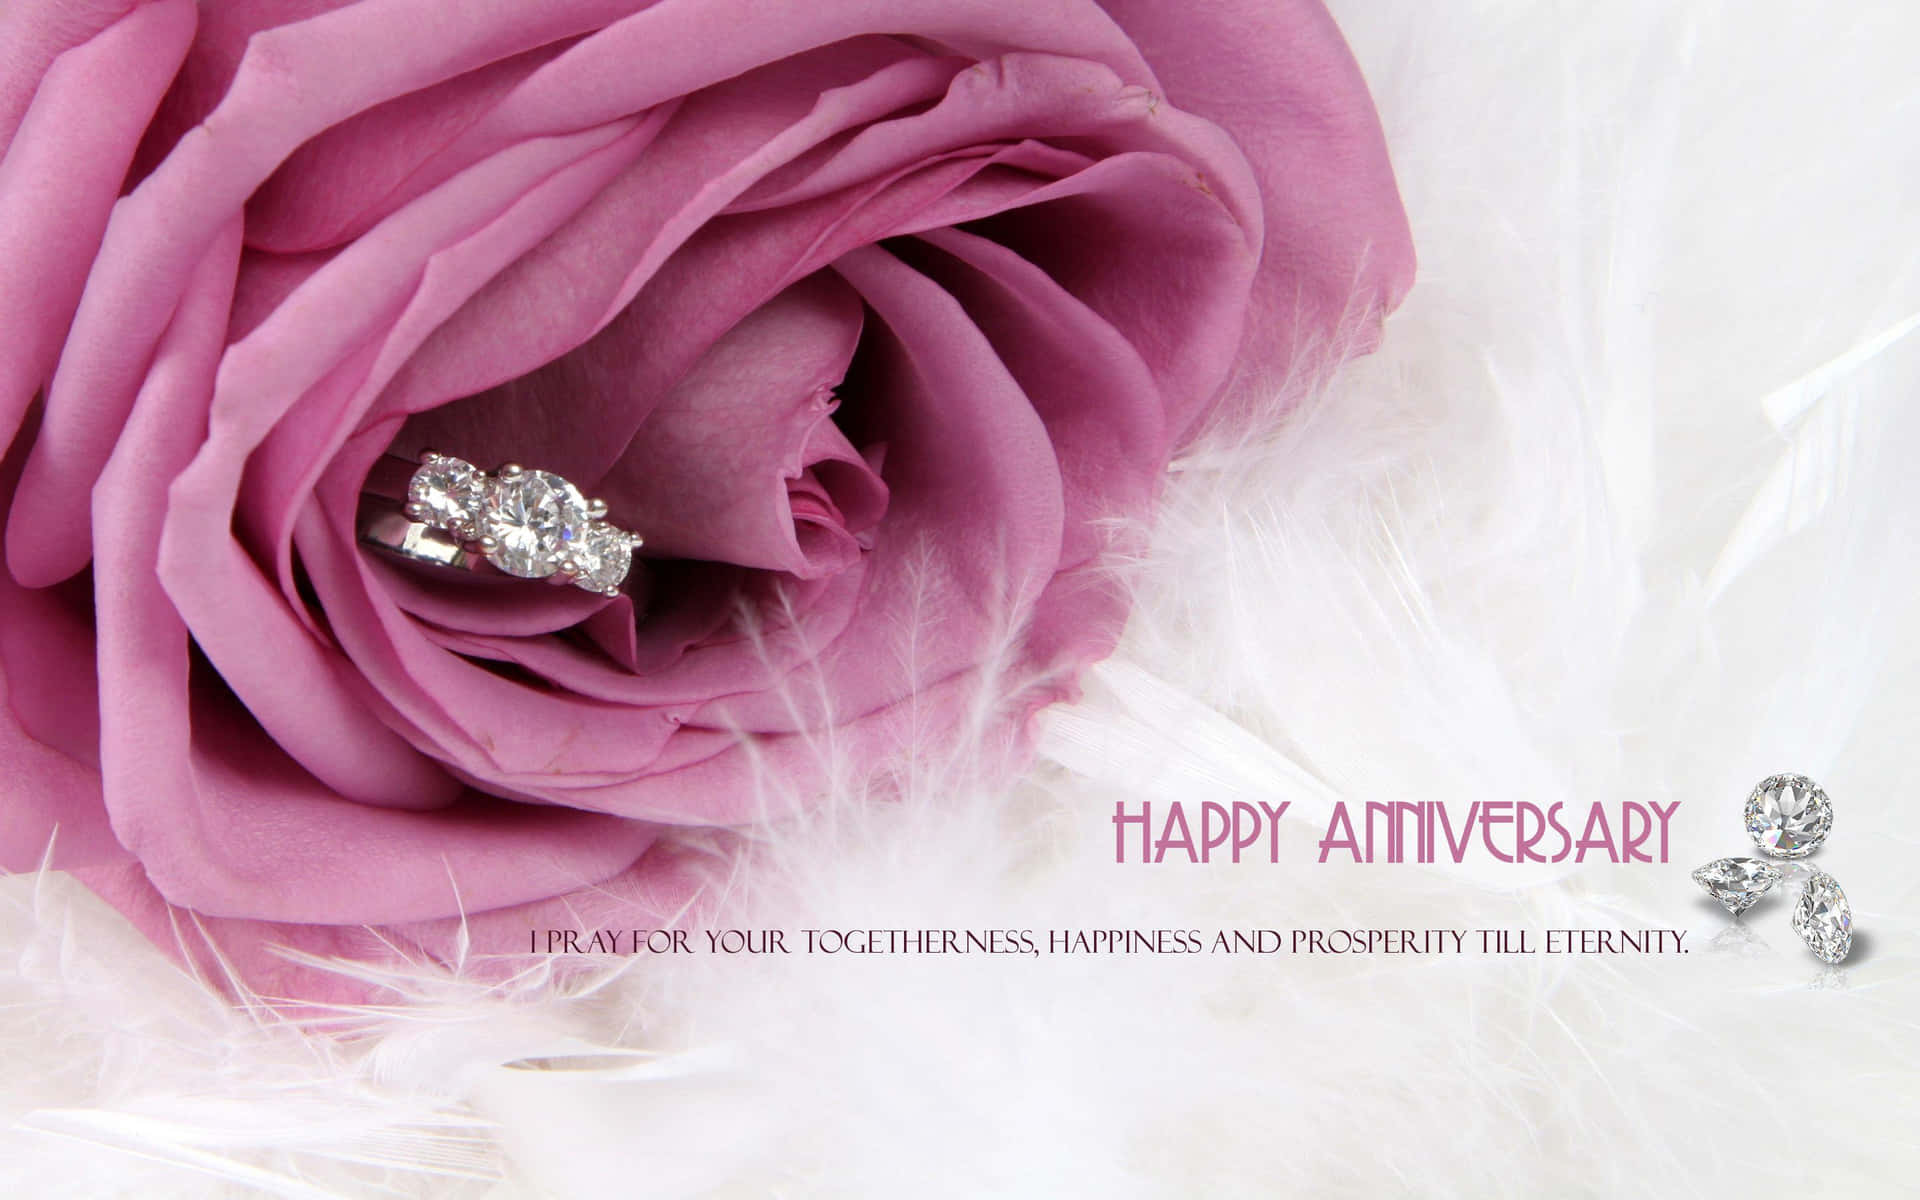 "Celebrate your everlasting love and Happy Anniversary!"